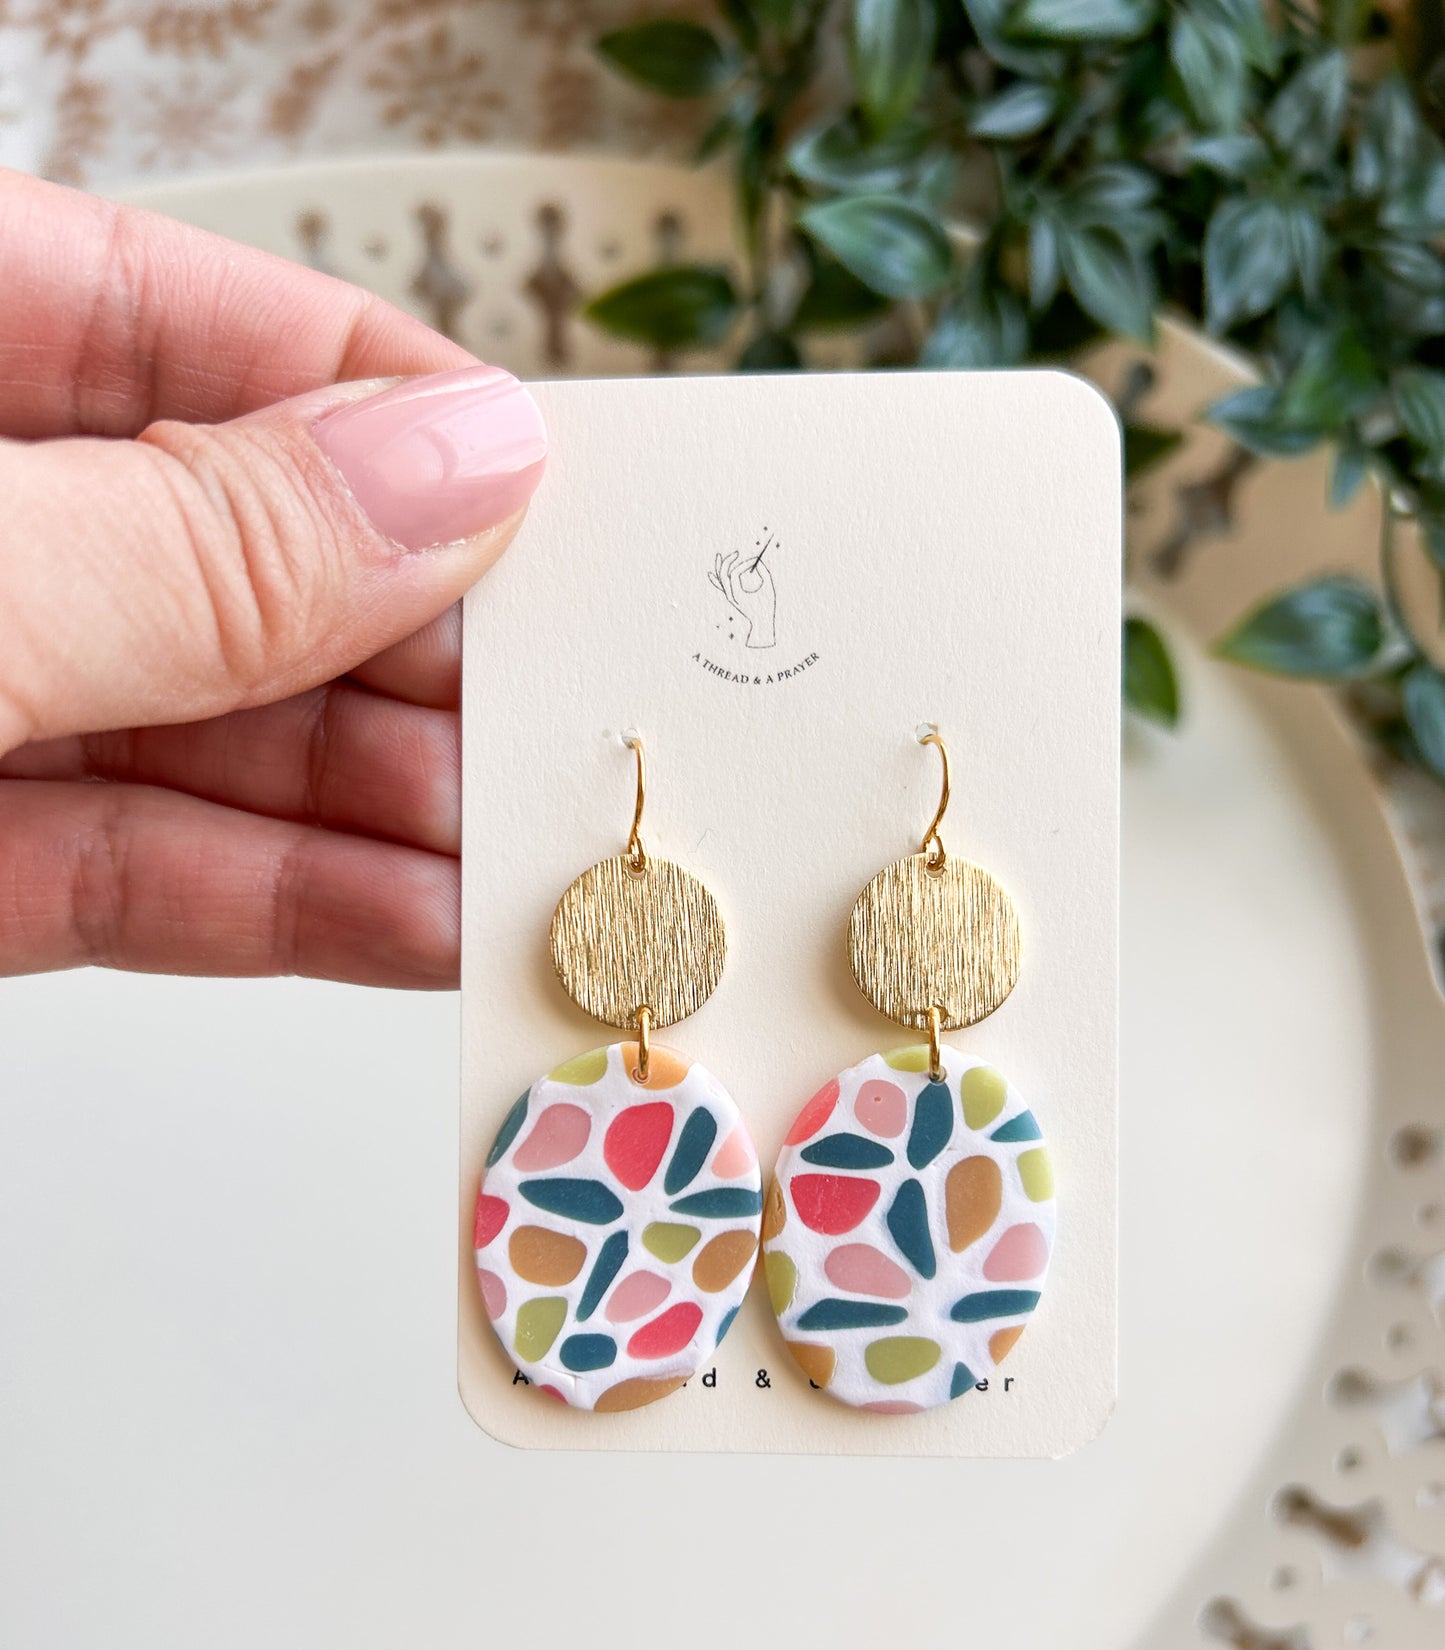 Spring Ahead Stained Glass Earrings | Spring Fashion | Neons | Statement Earrings | Lightweight